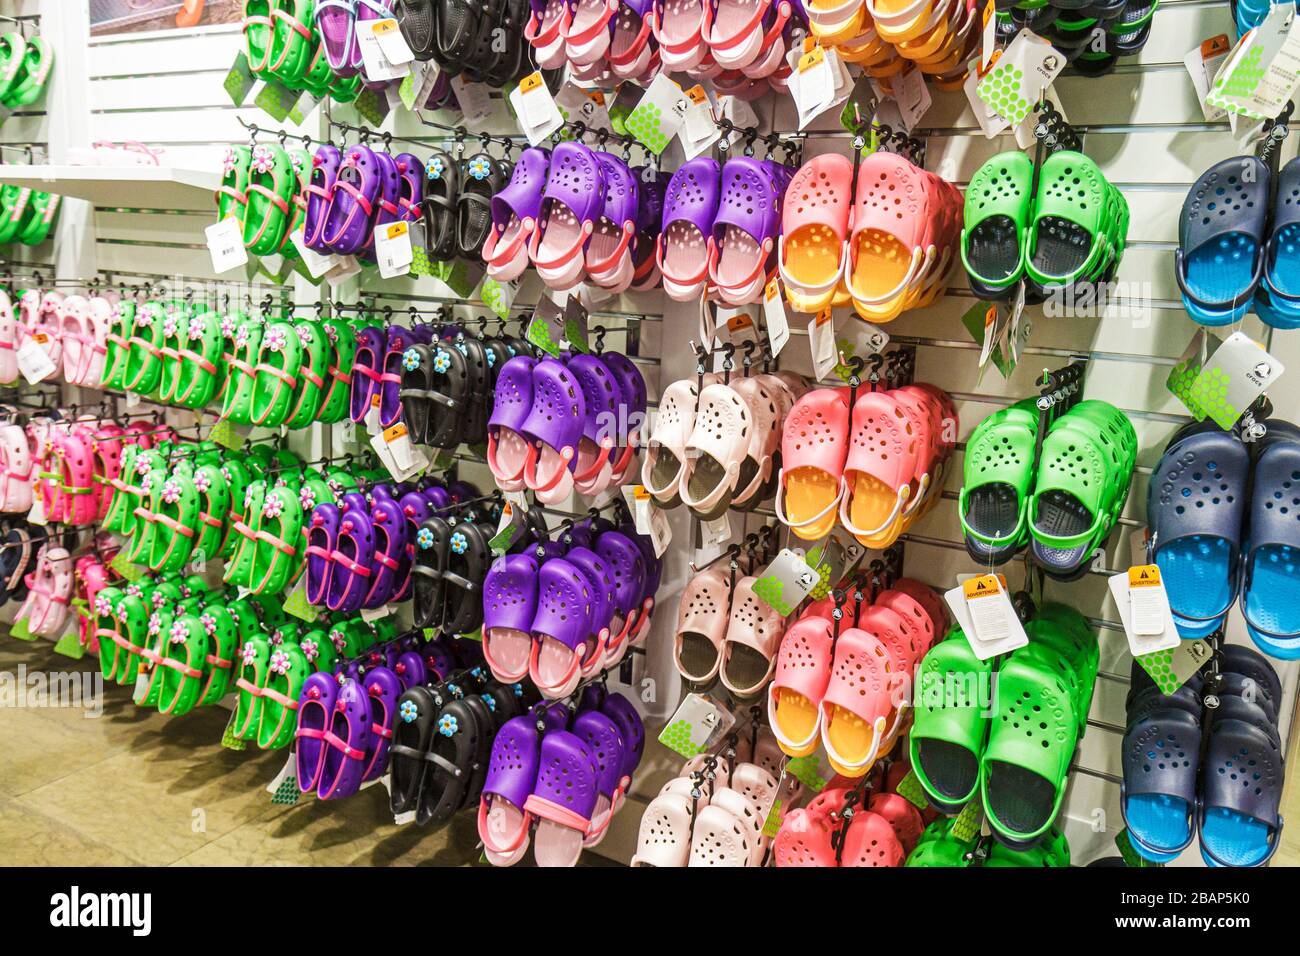 Miami Florida,Aventura mall,display case sale,Crocs,shoes,footwear,luxury,store,stores,businesses,district,FL110825096 Stock Photo